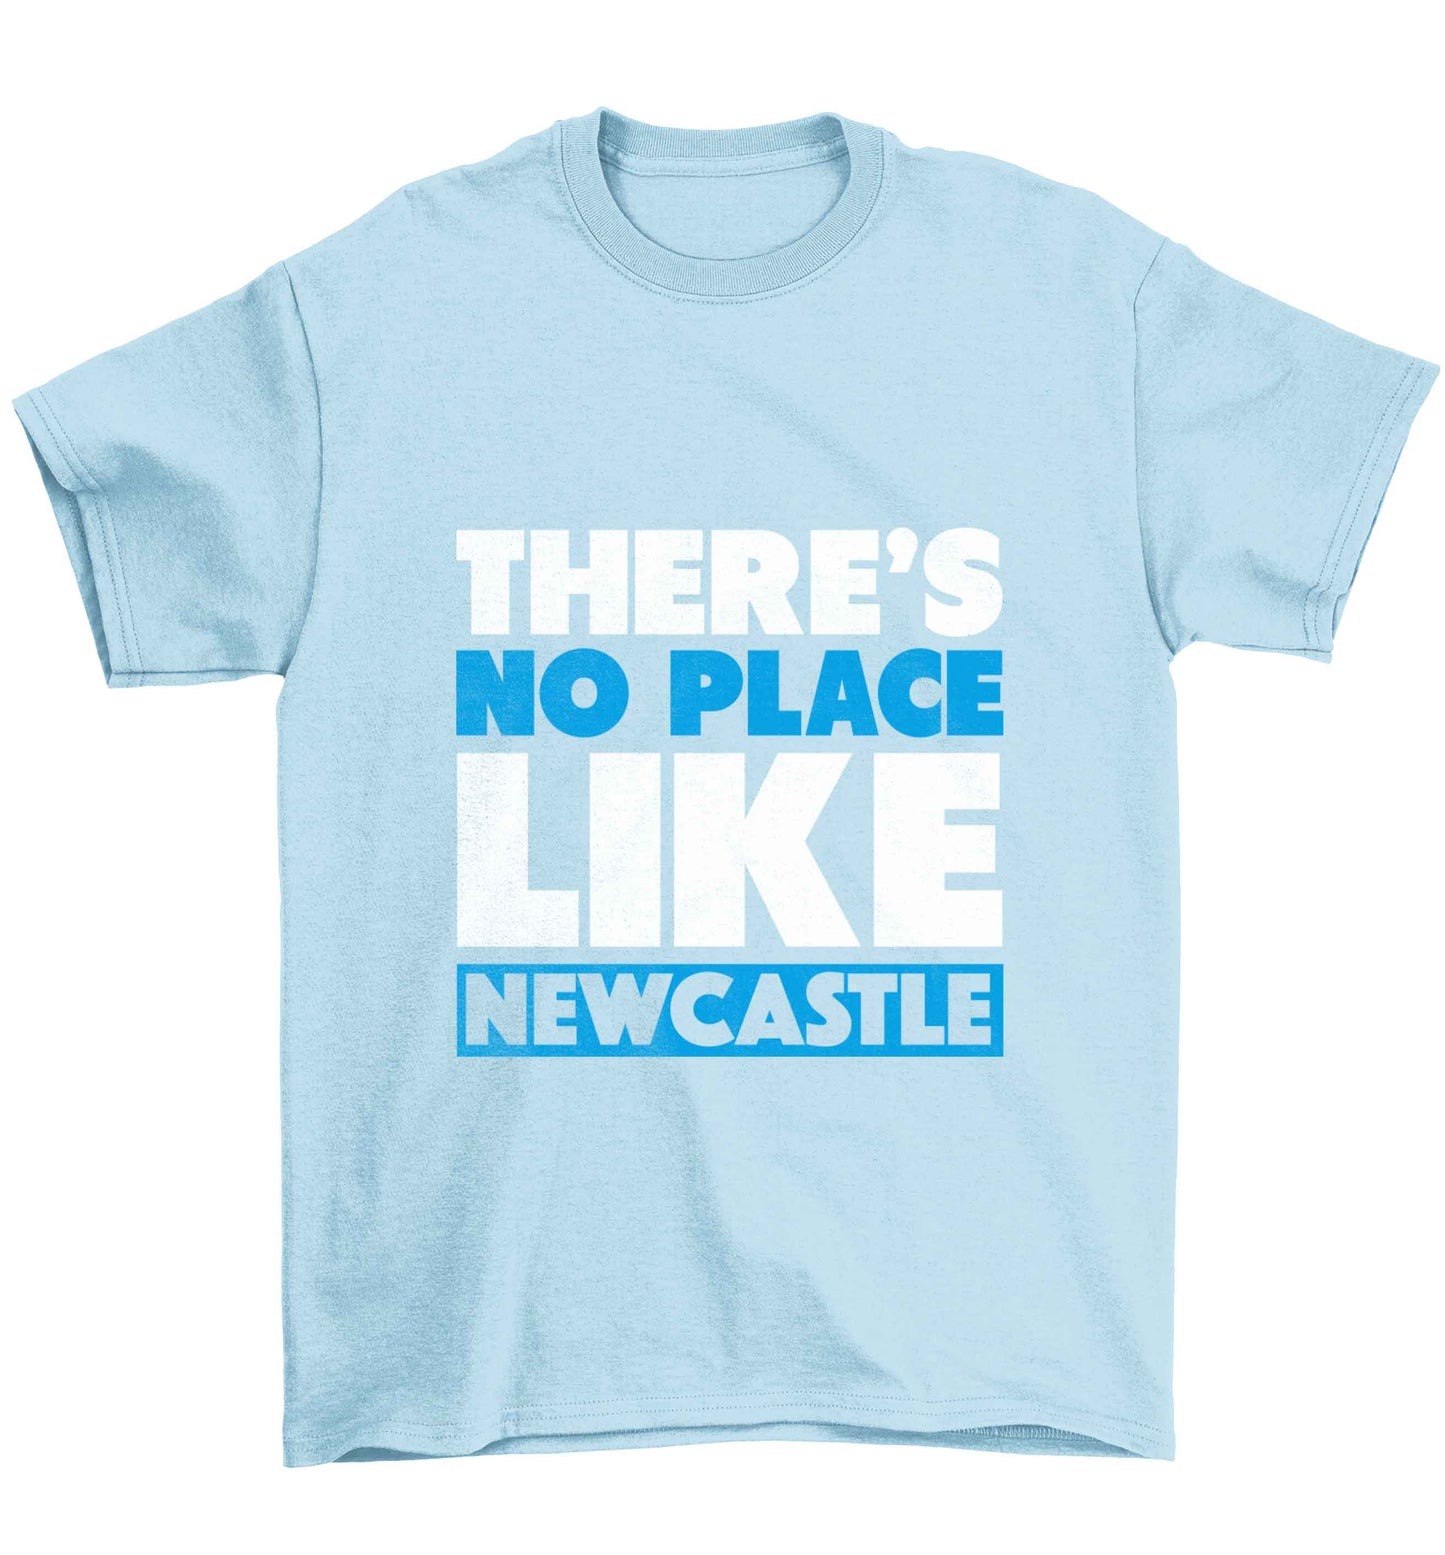 There's no place like Newcastle Children's light blue Tshirt 12-13 Years